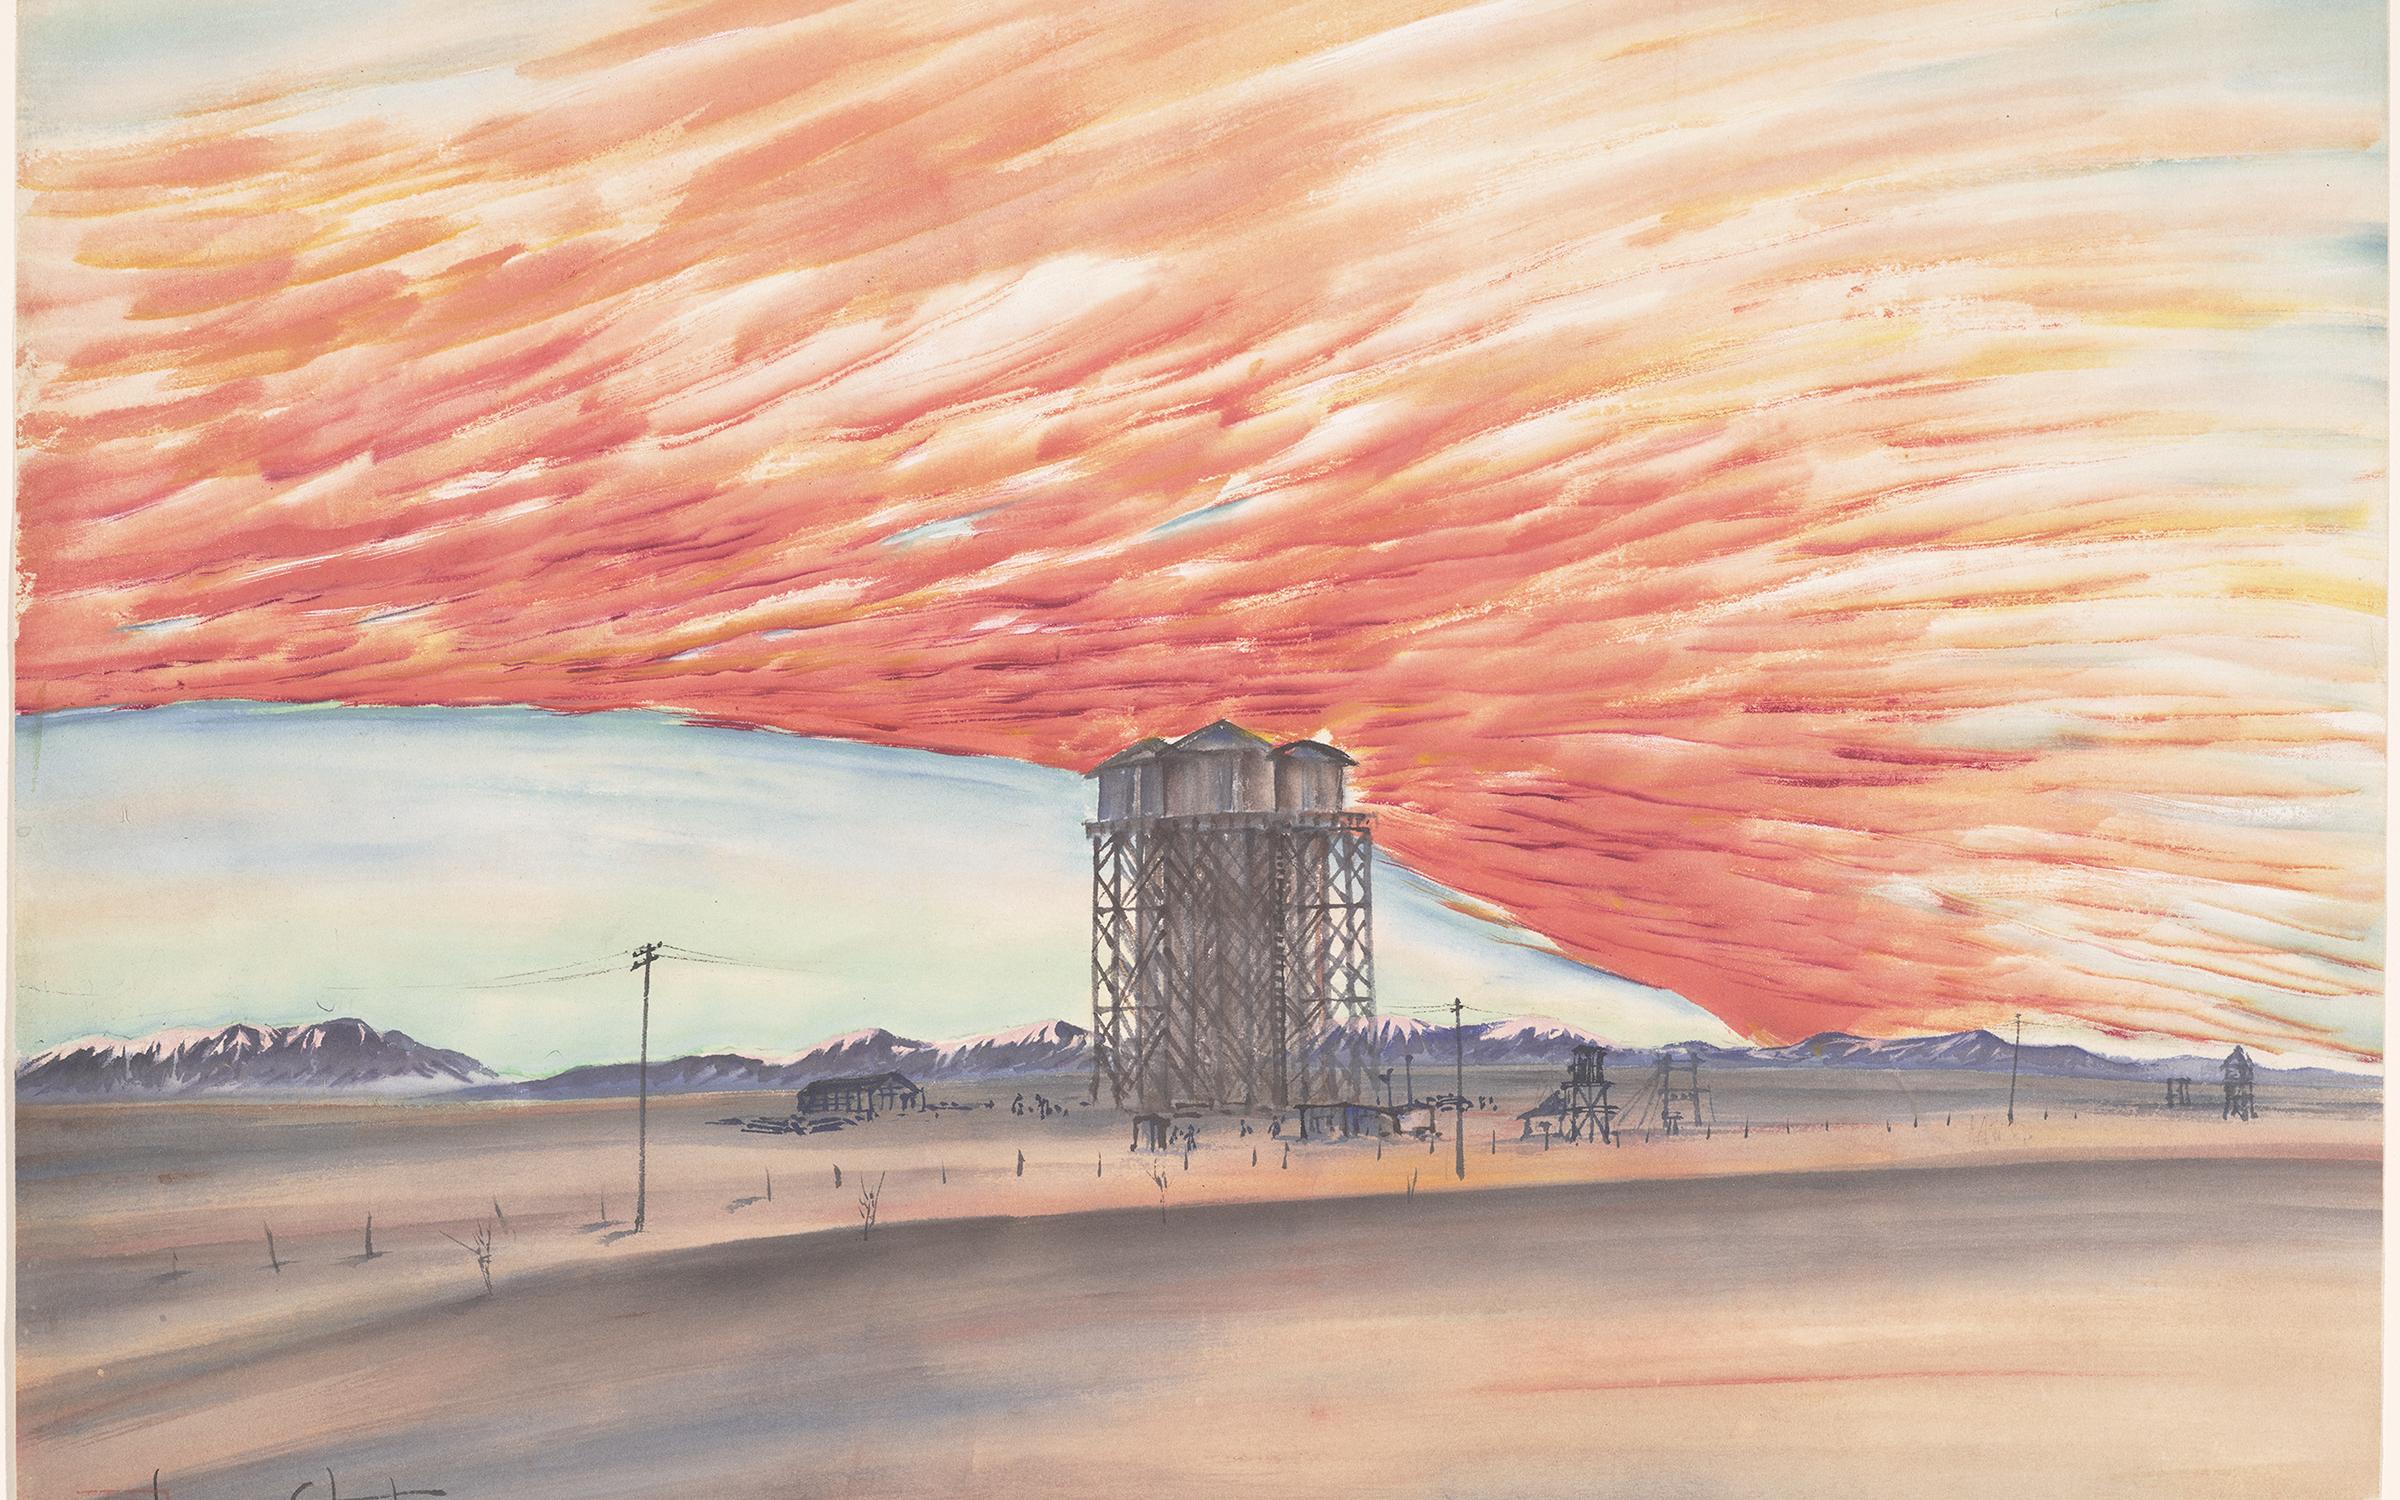 Chiura Obata (American, b. Japan, 1885-1975), Sunset, Water Tower, March 10, 1943, ink, color, and mica on paper, 15 1/4 x 20 1/2., Fine Arts Museum of San Francisco, Museum purchase, gift of the Graphic Arts Council, 2001.28.1